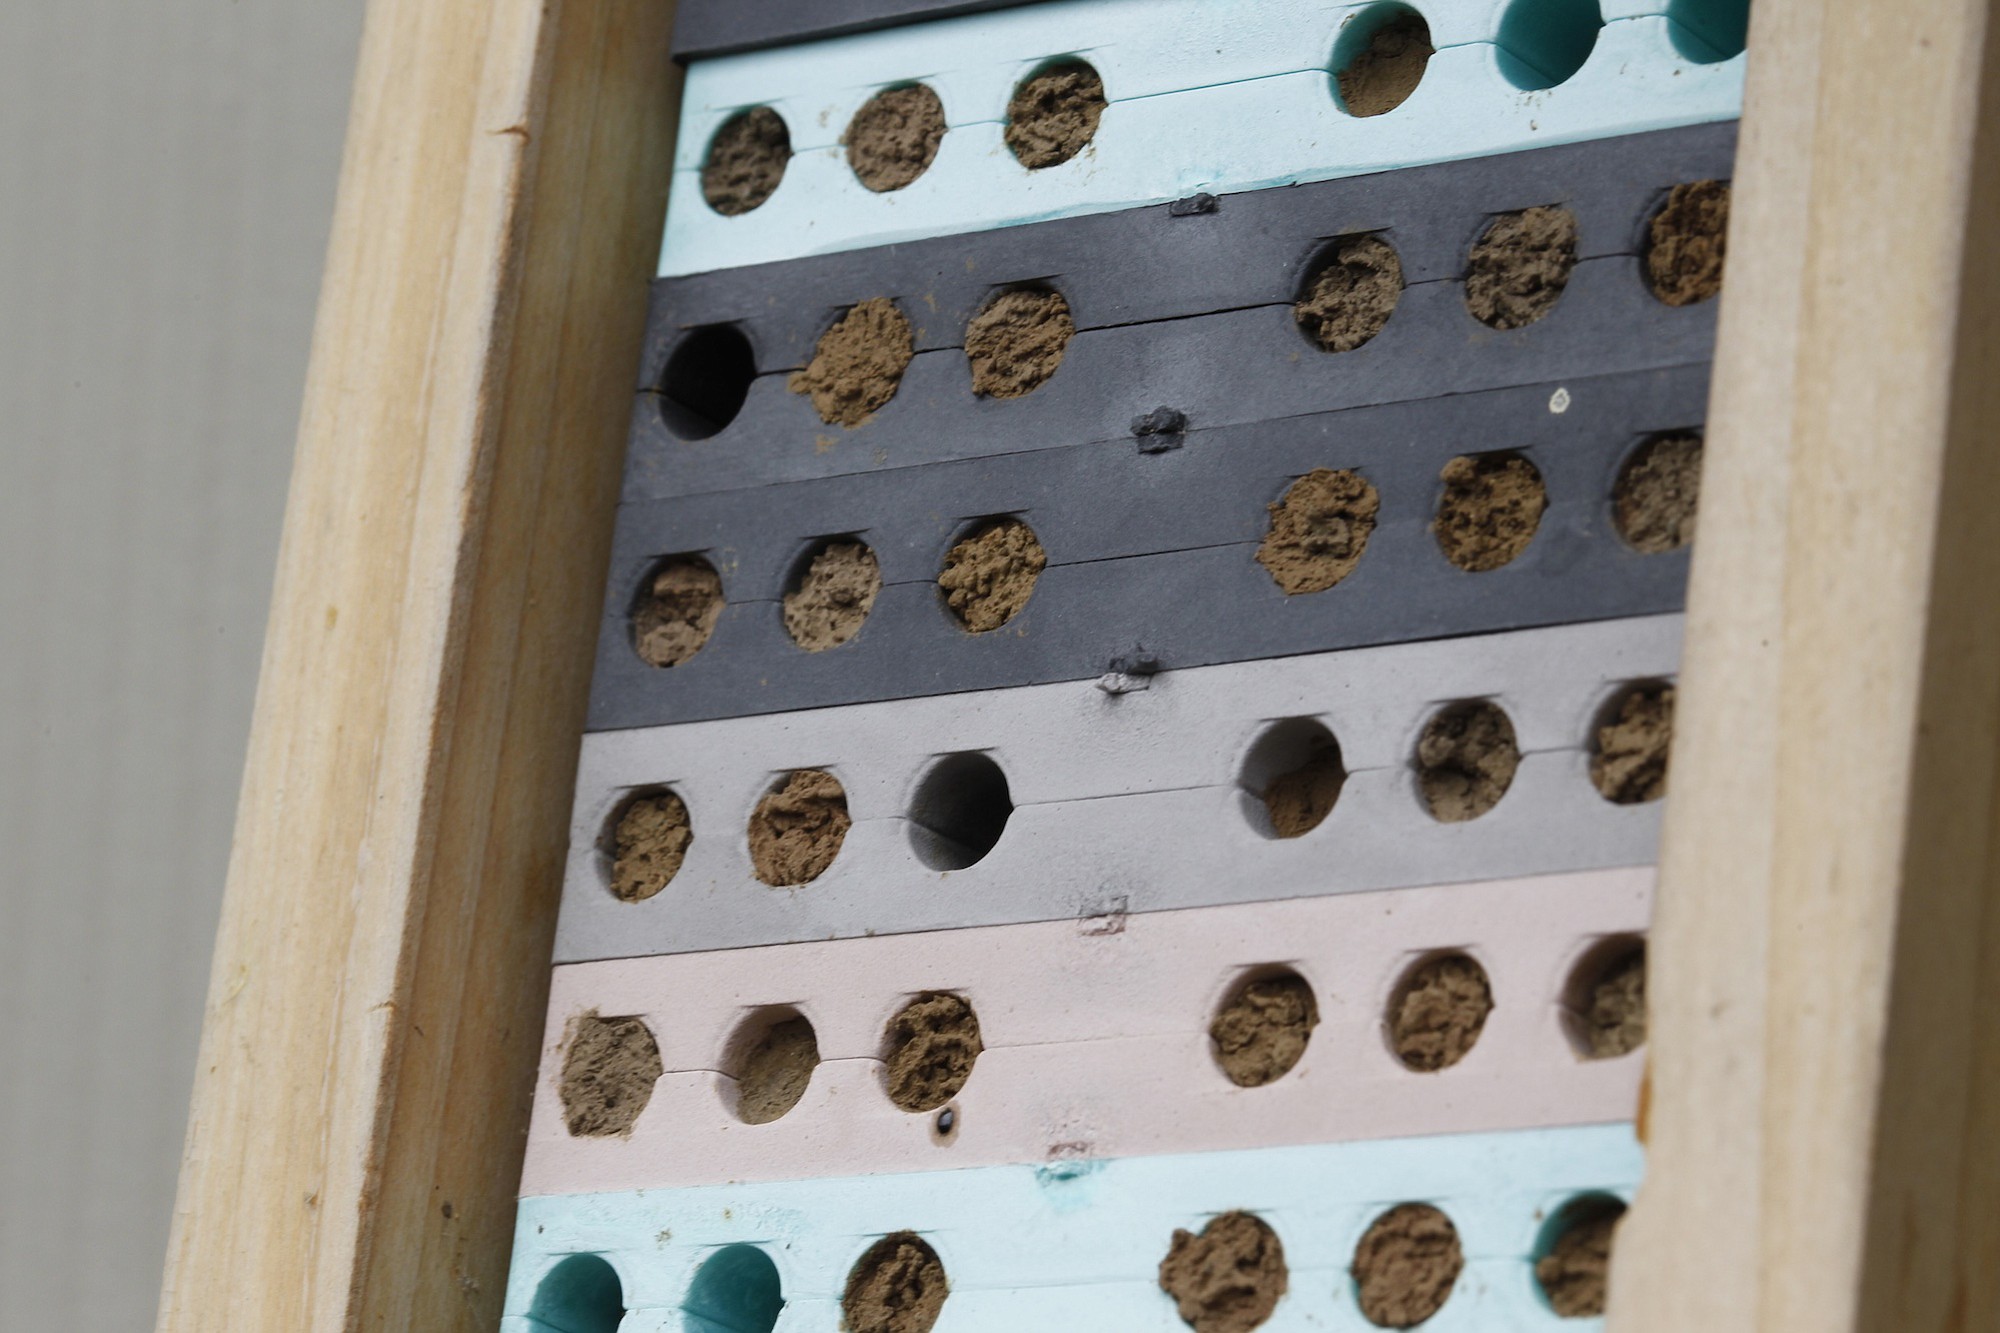 A mason bee nesting block hangs in the Vancouver garden of Susan Sanders on Sunday afternoon during the Earth-Friendly Garden Tour.